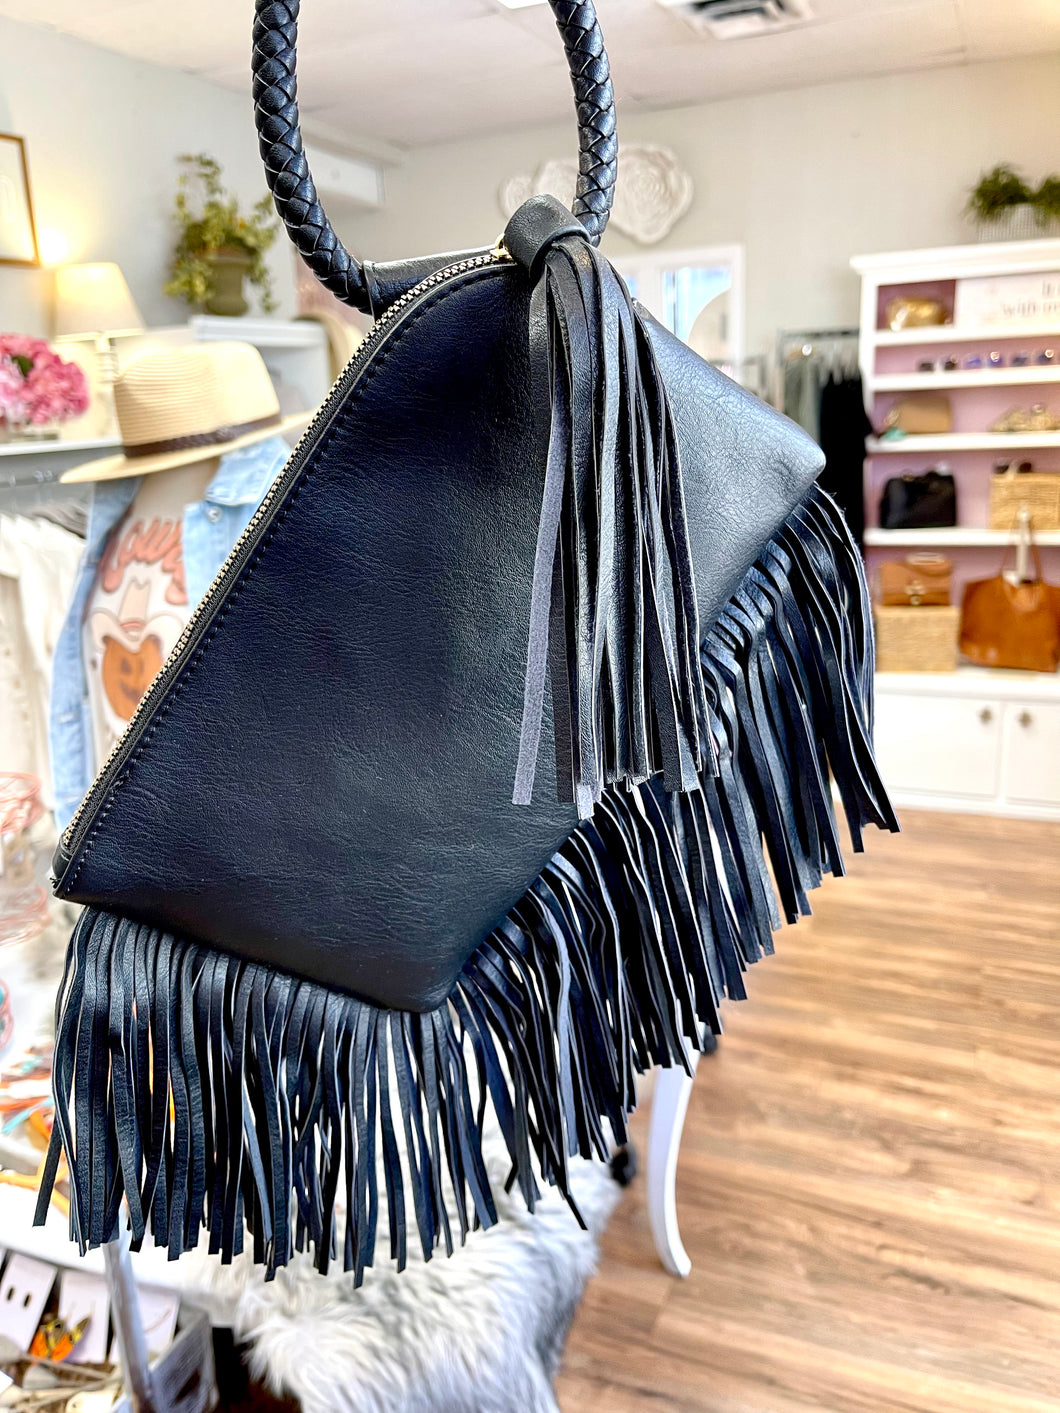 Fringe Is In Handbag - Wildfire and Lace